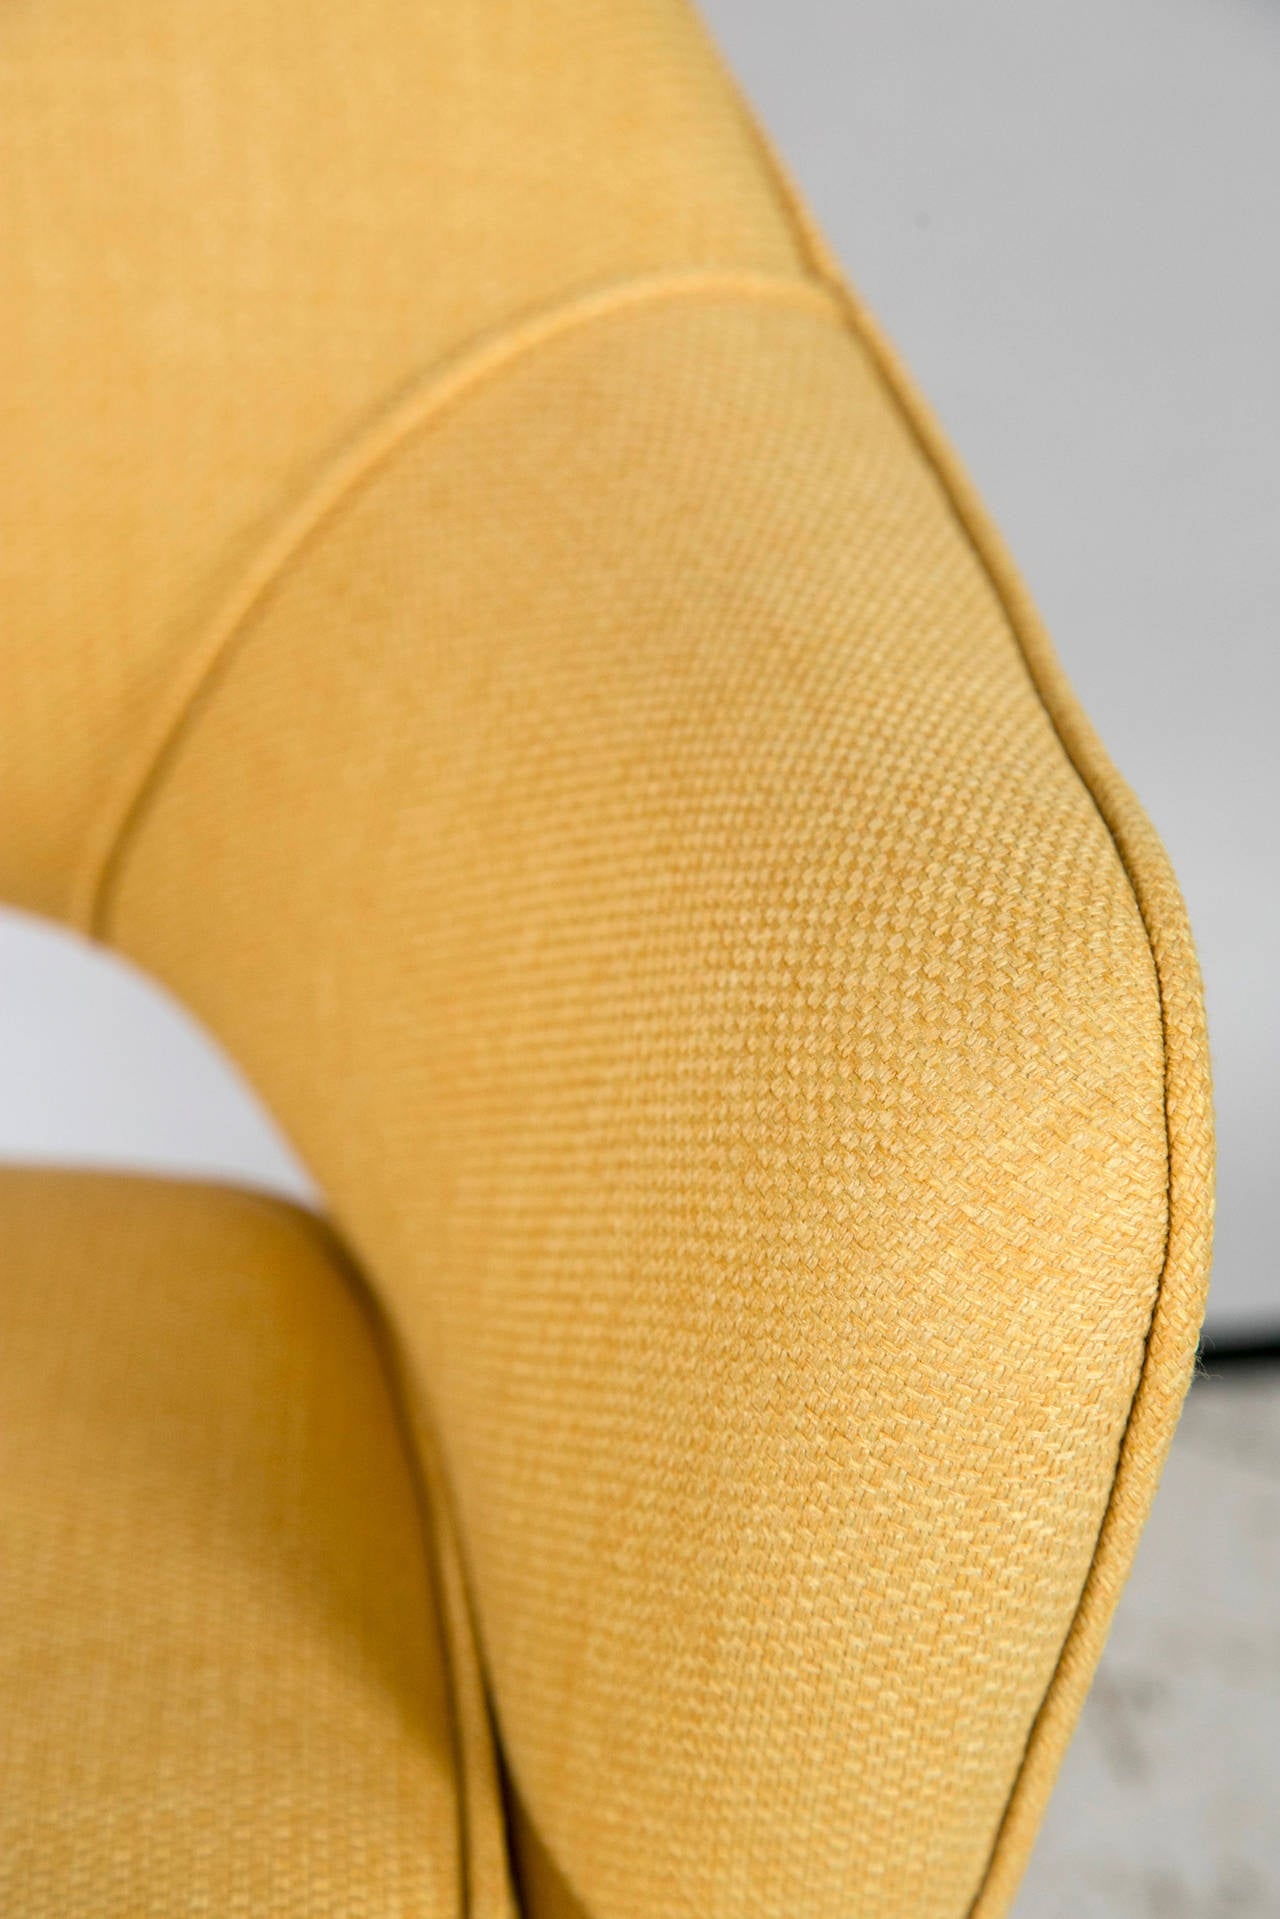 Mid-20th Century Saarinen for Knoll Executive Arm Chairs in Yellow Woven-Microfiber